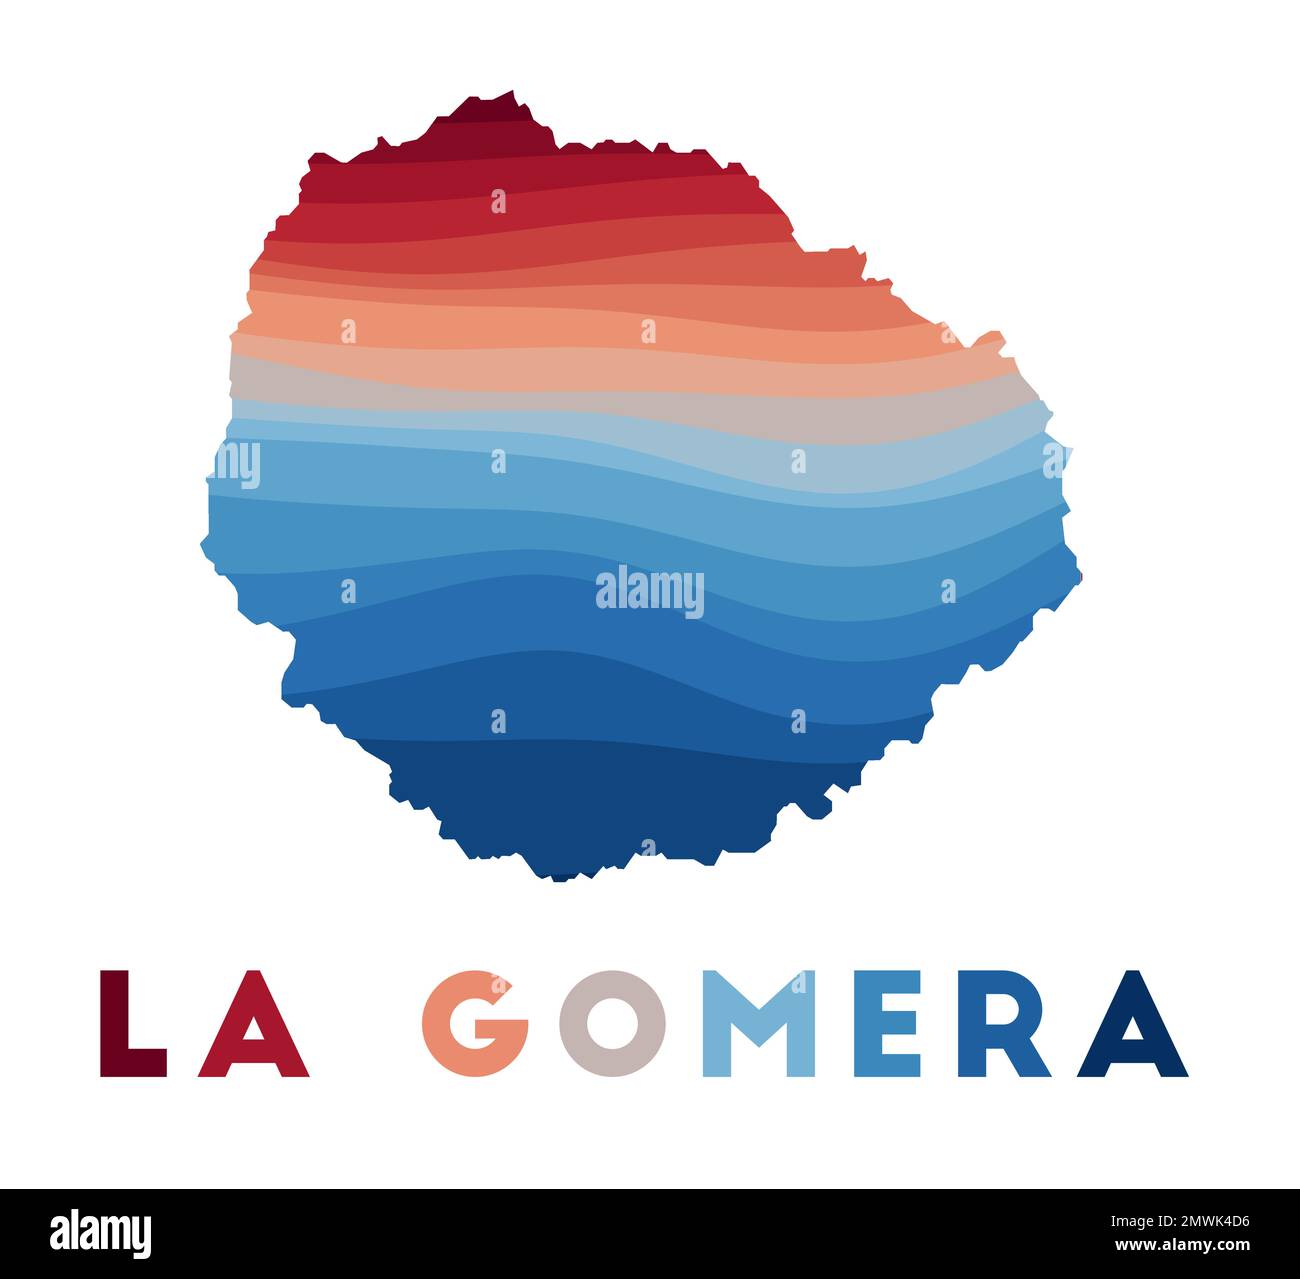 La Gomera map. Map of the island with beautiful geometric waves in red blue colors. Vivid La Gomera shape. Vector illustration. Stock Vector